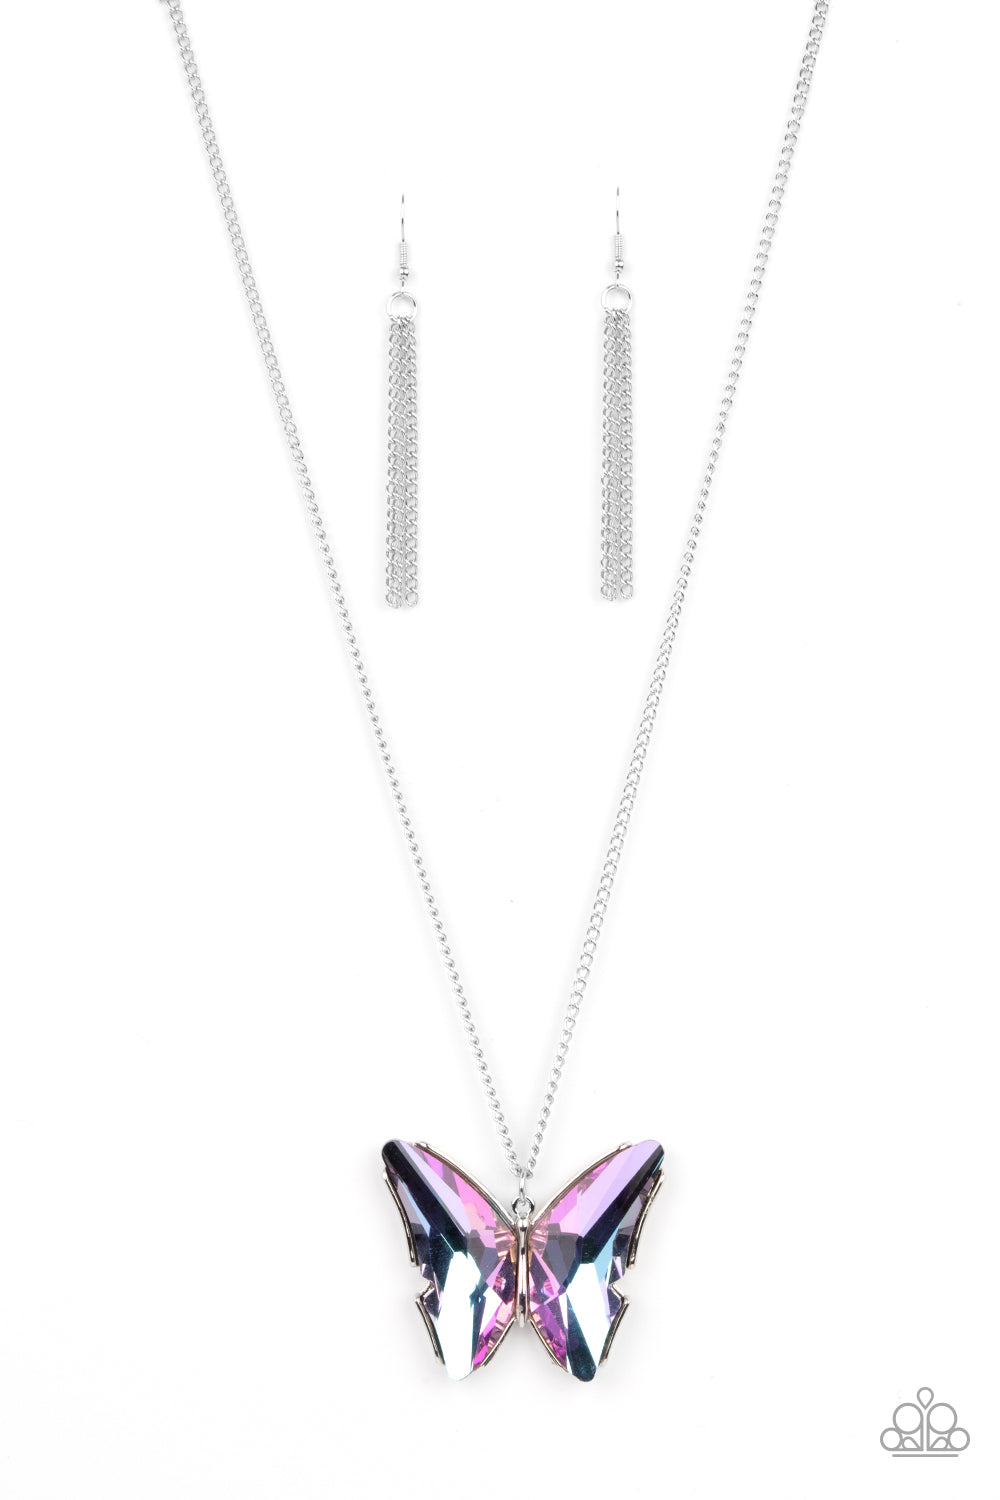 Paparazzi The Social Butterfly Effect Purple Long Necklace - Life Of The Party June 2021